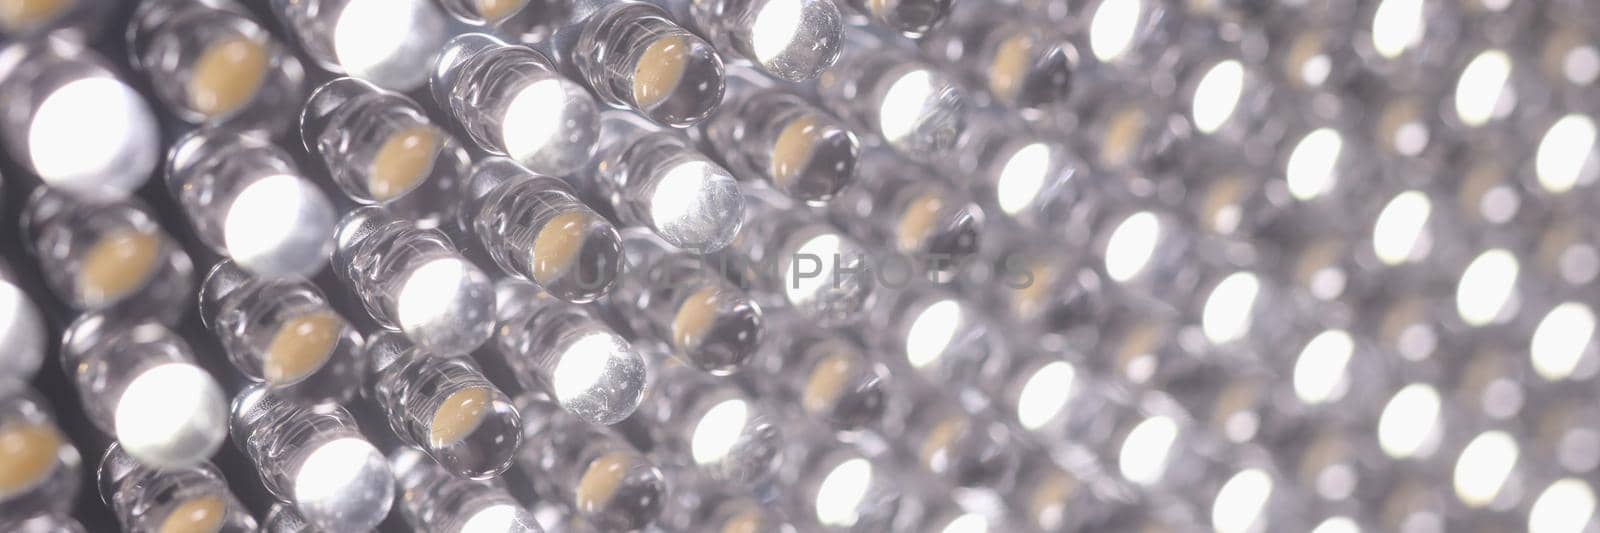 Closeup of lots of bright leds in lamp background. Energy saving lamps concept